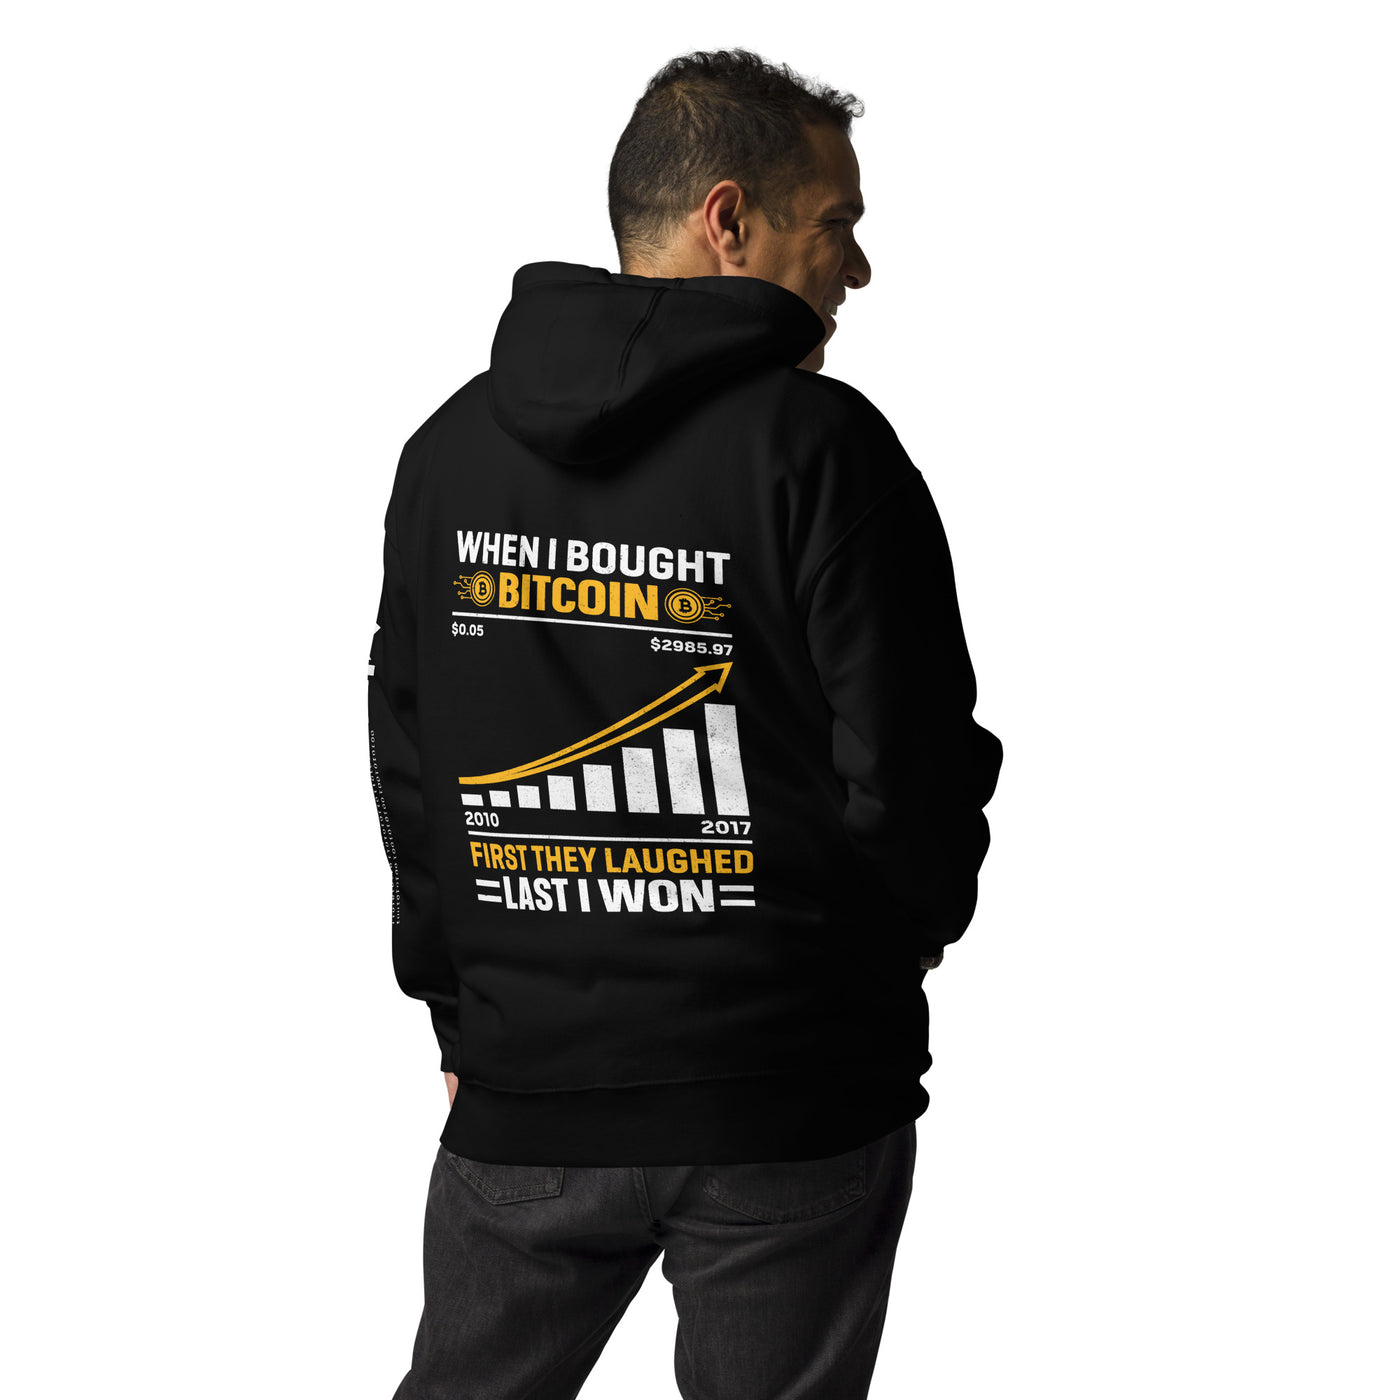 When I Bought Bitcoin, First they laughed, Last I won Unisex Hoodie